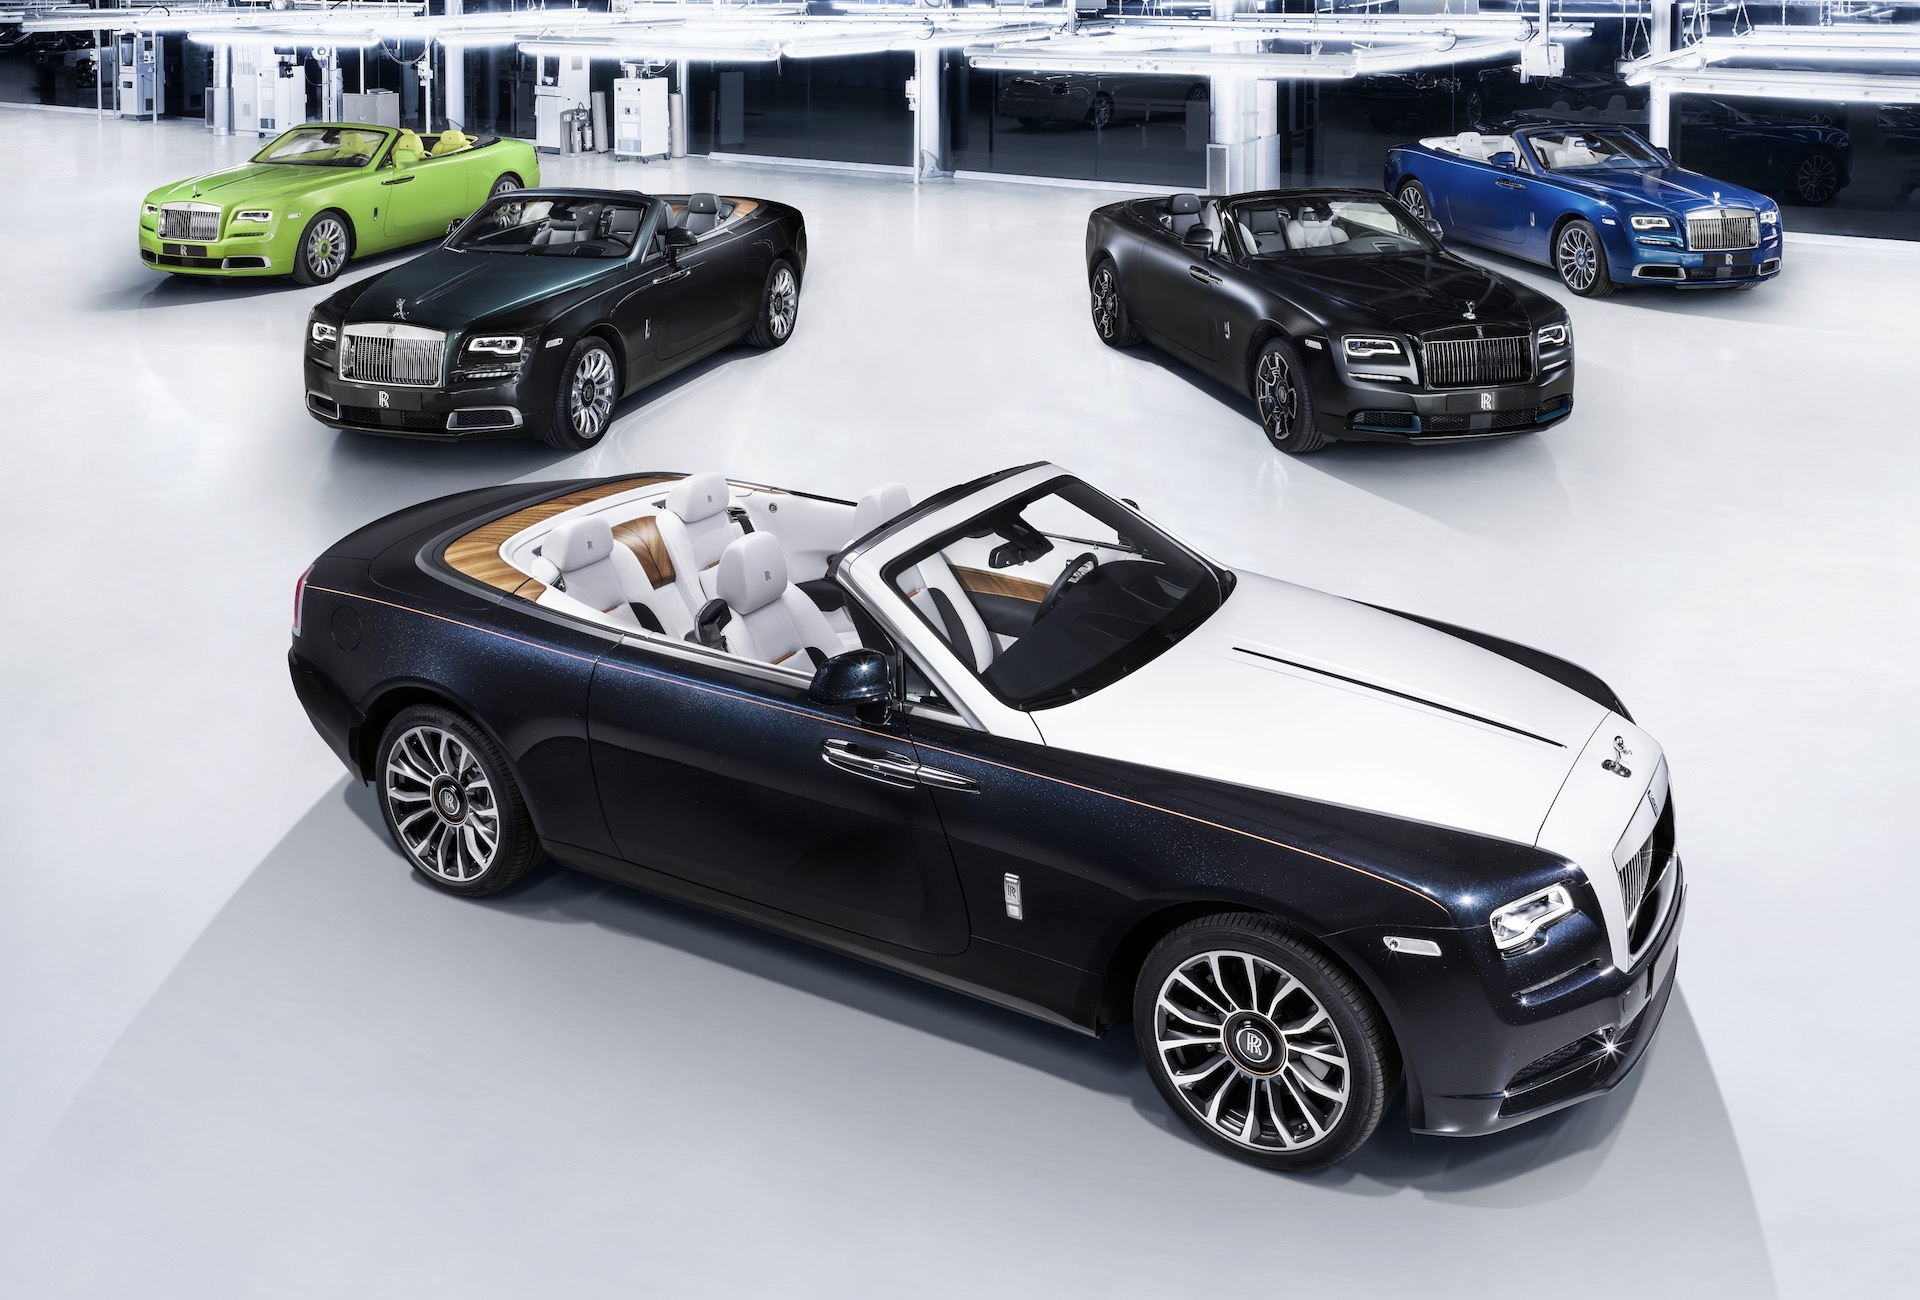 Rolls-Royce Dawn convertible production coming to an end